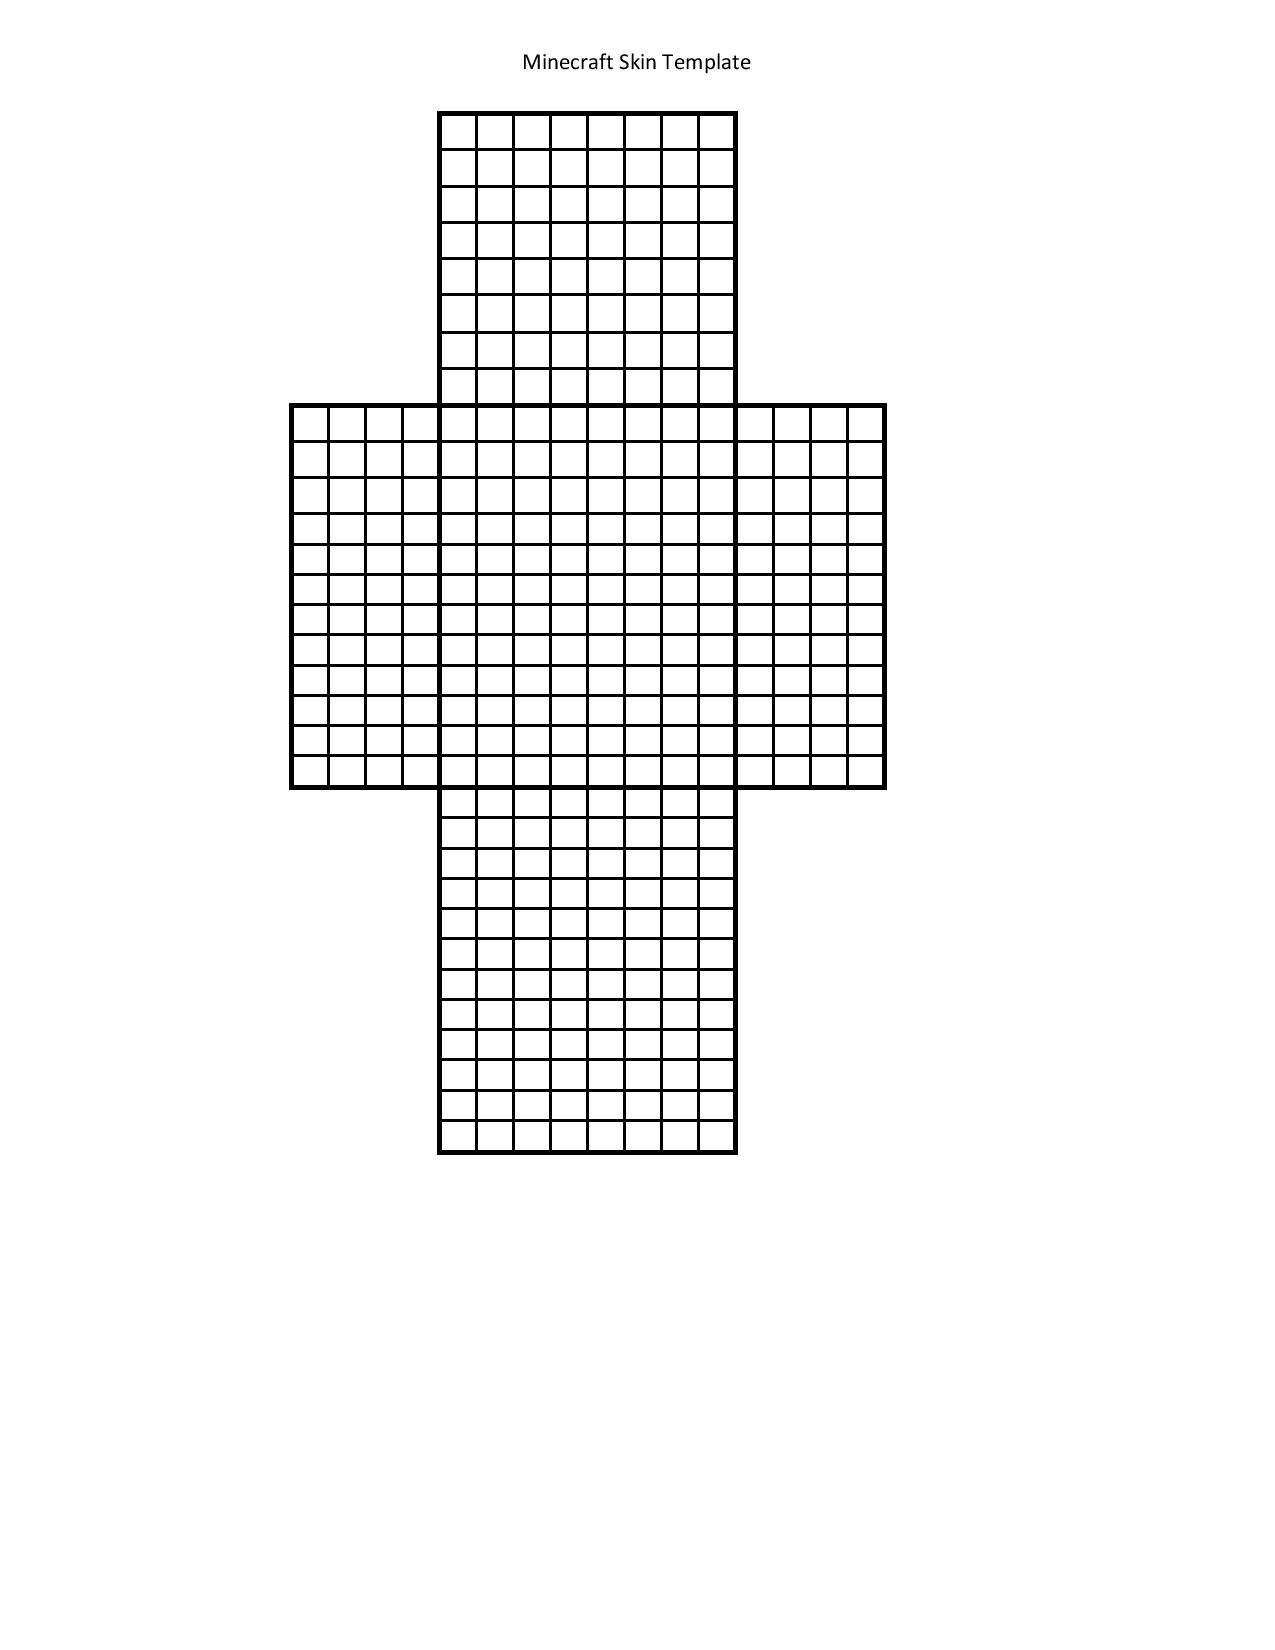 Minecraft Steve Papercraft Printable Template for Minecraft Skin Creation Use Markers or